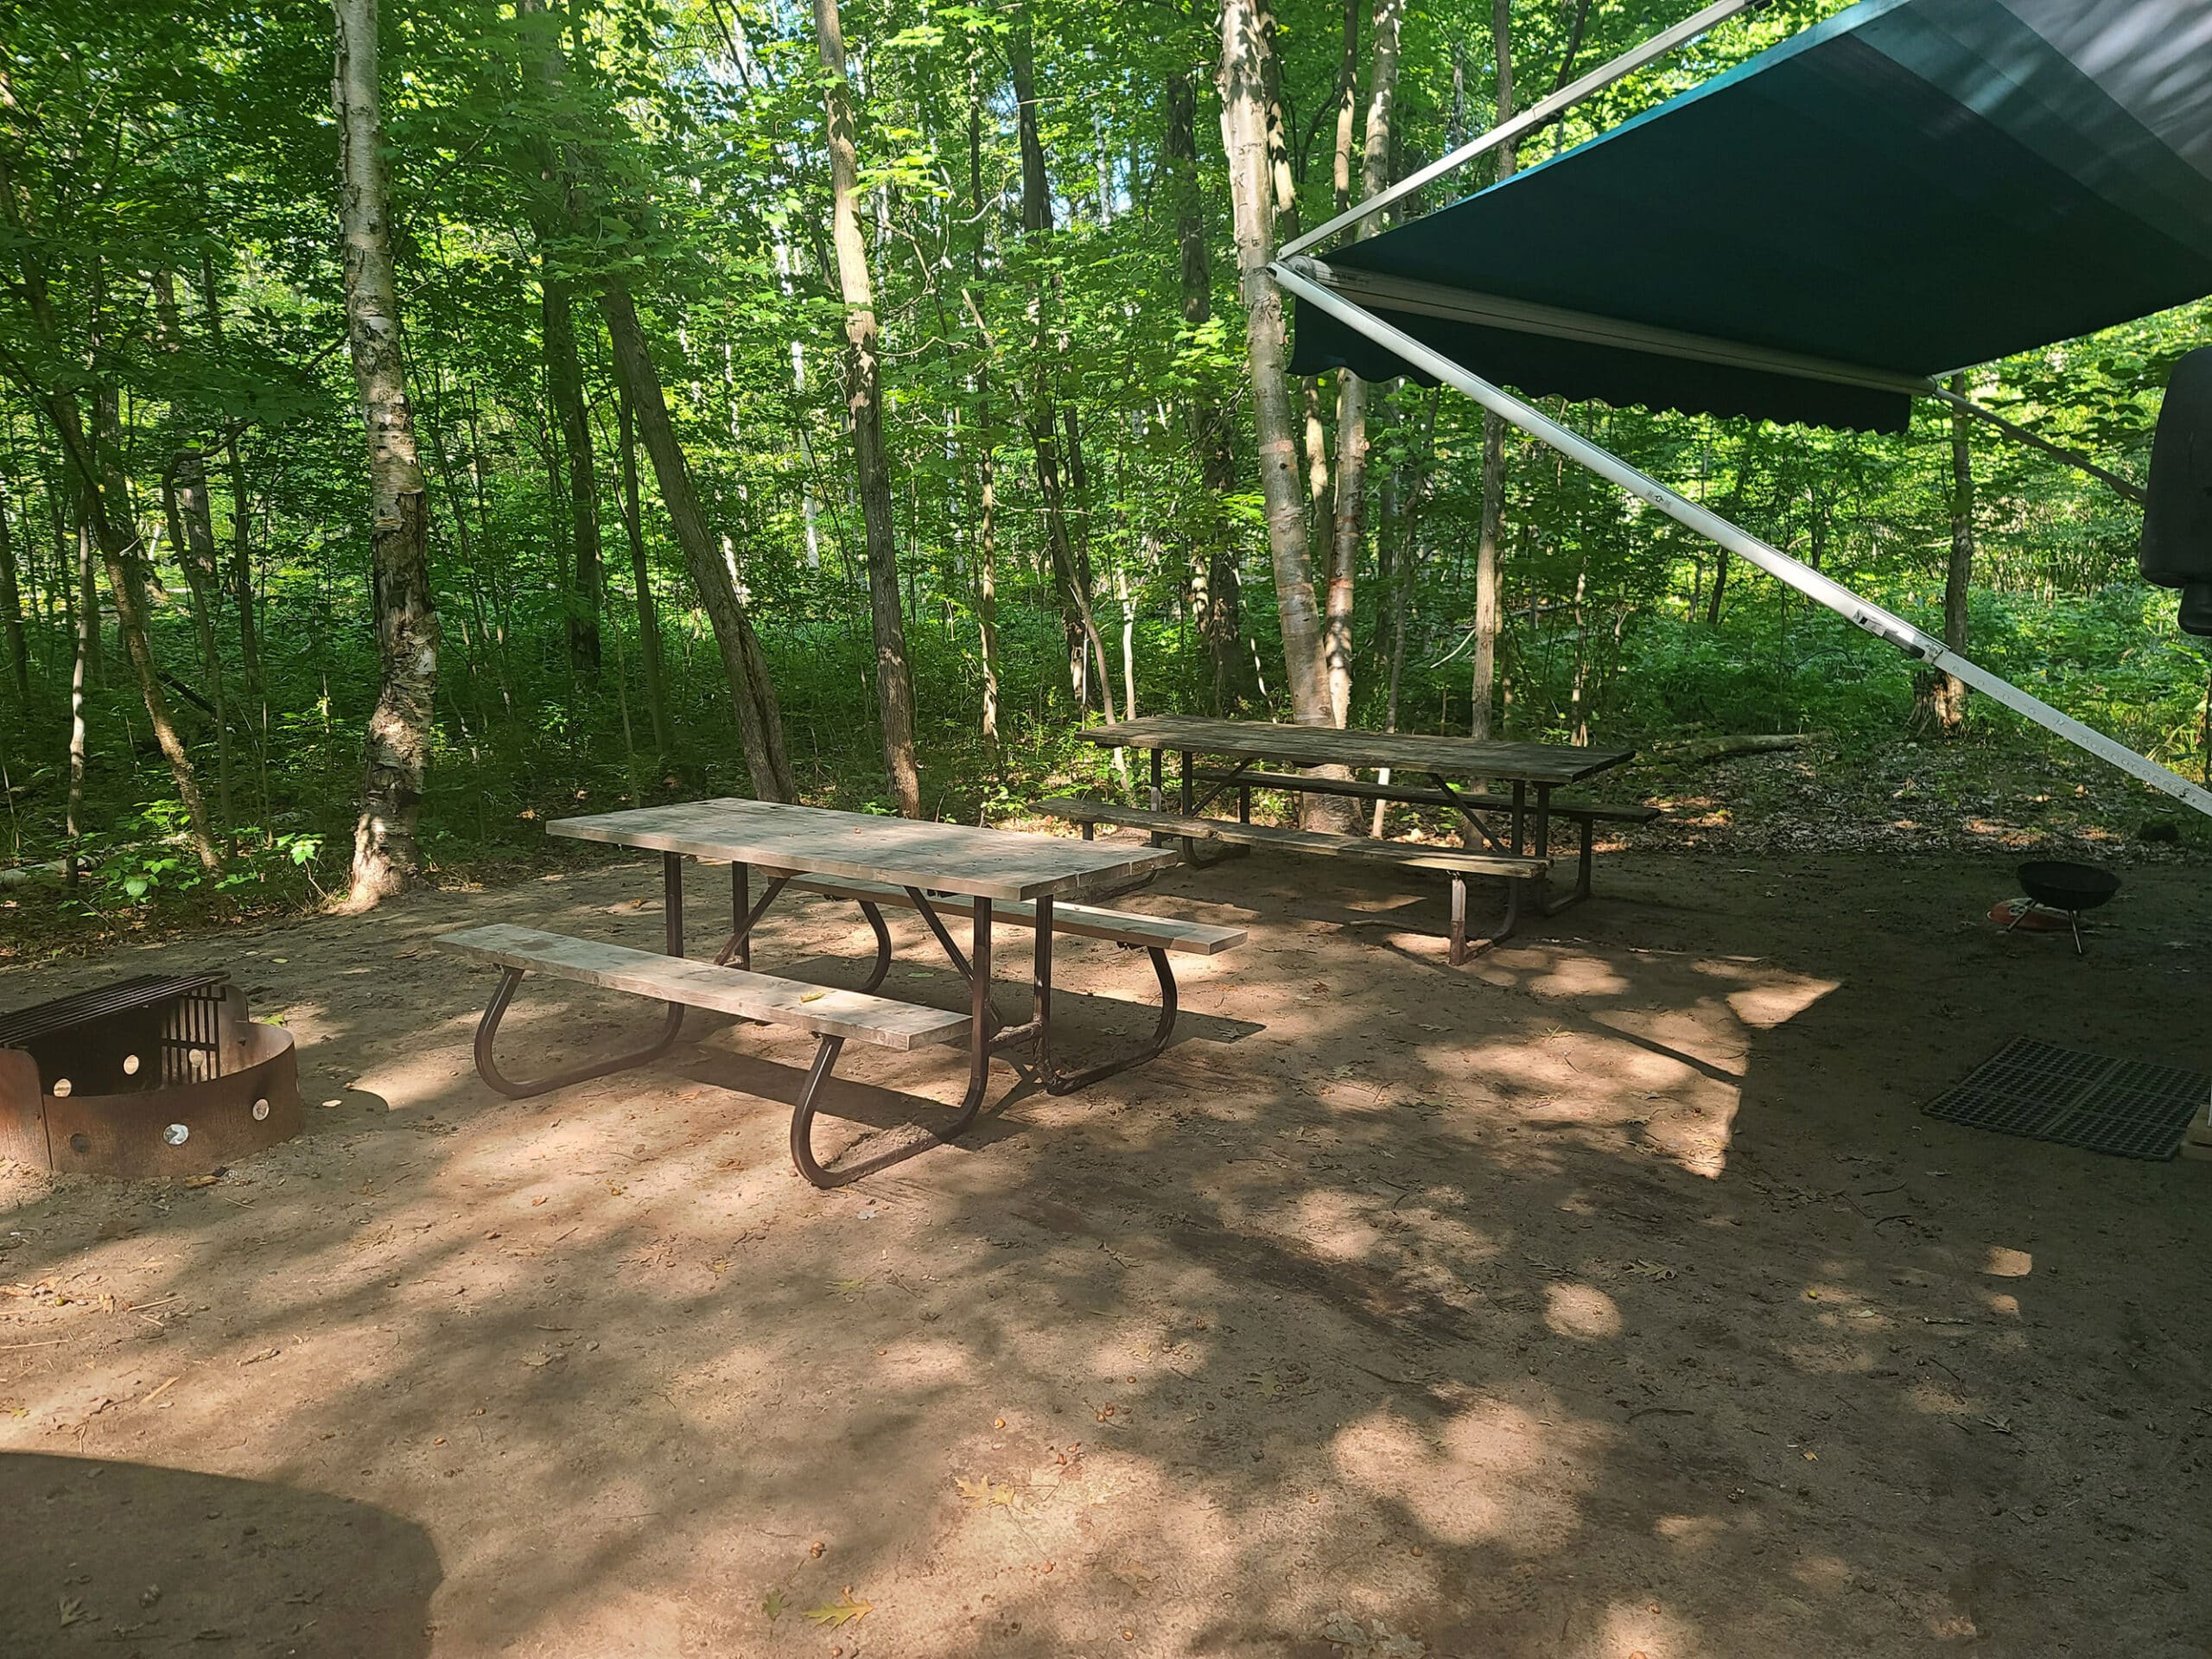 A campsite with 2 picnic tables.